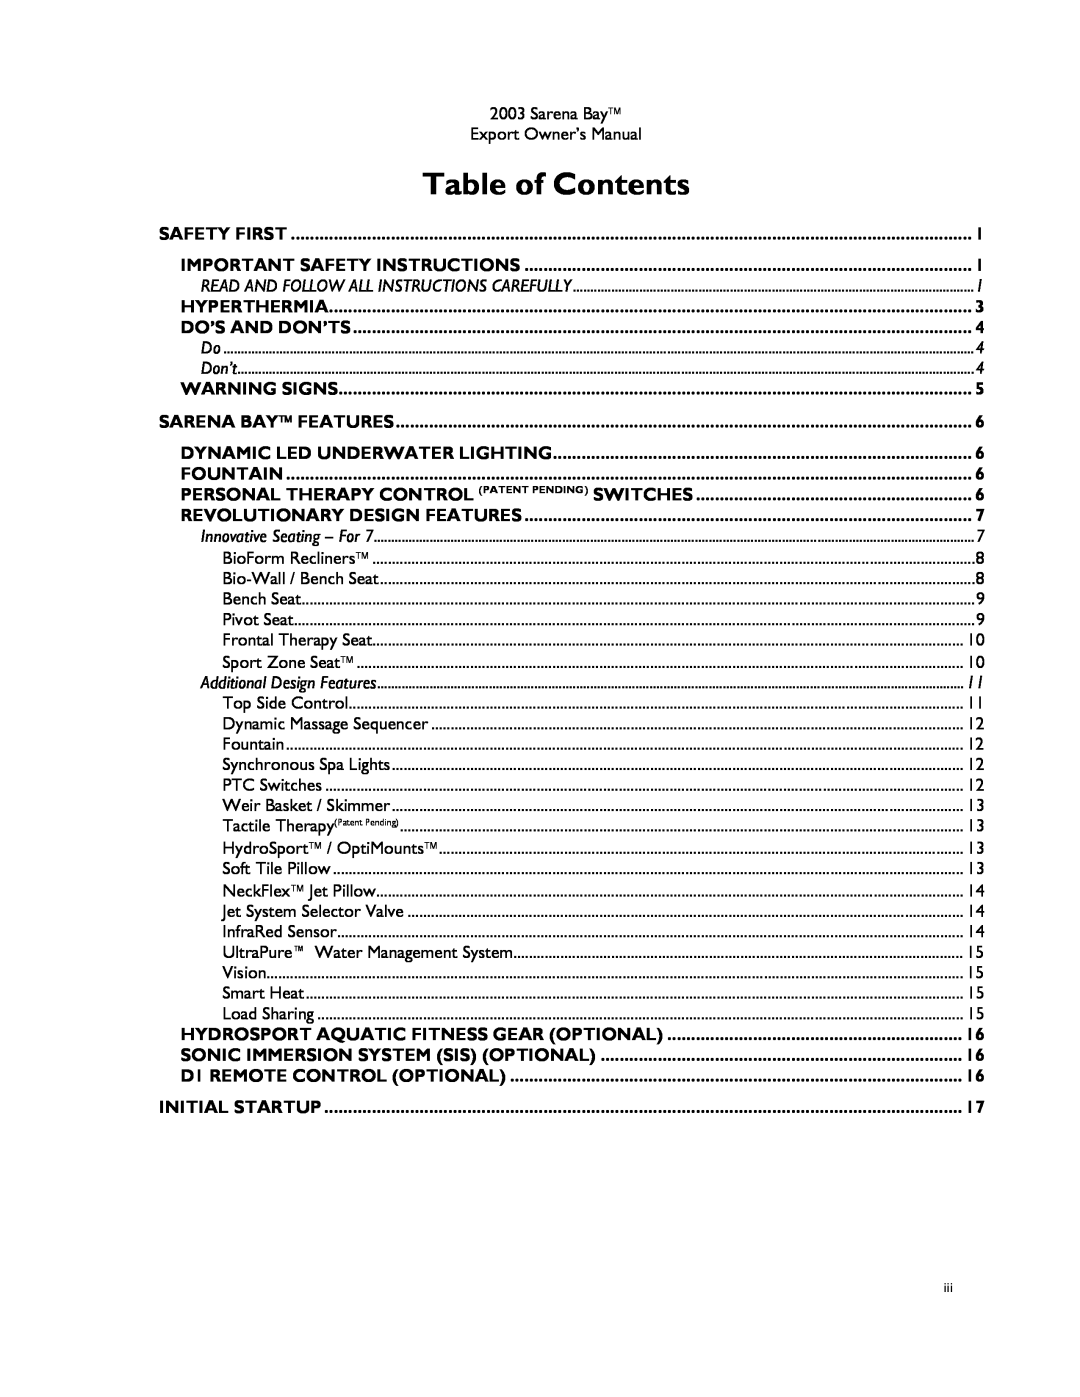 Dimension One Spas Sarena Bay Table of Contents, Personal Therapy Control Patent Pending Switches, Export Owner’s Manual 